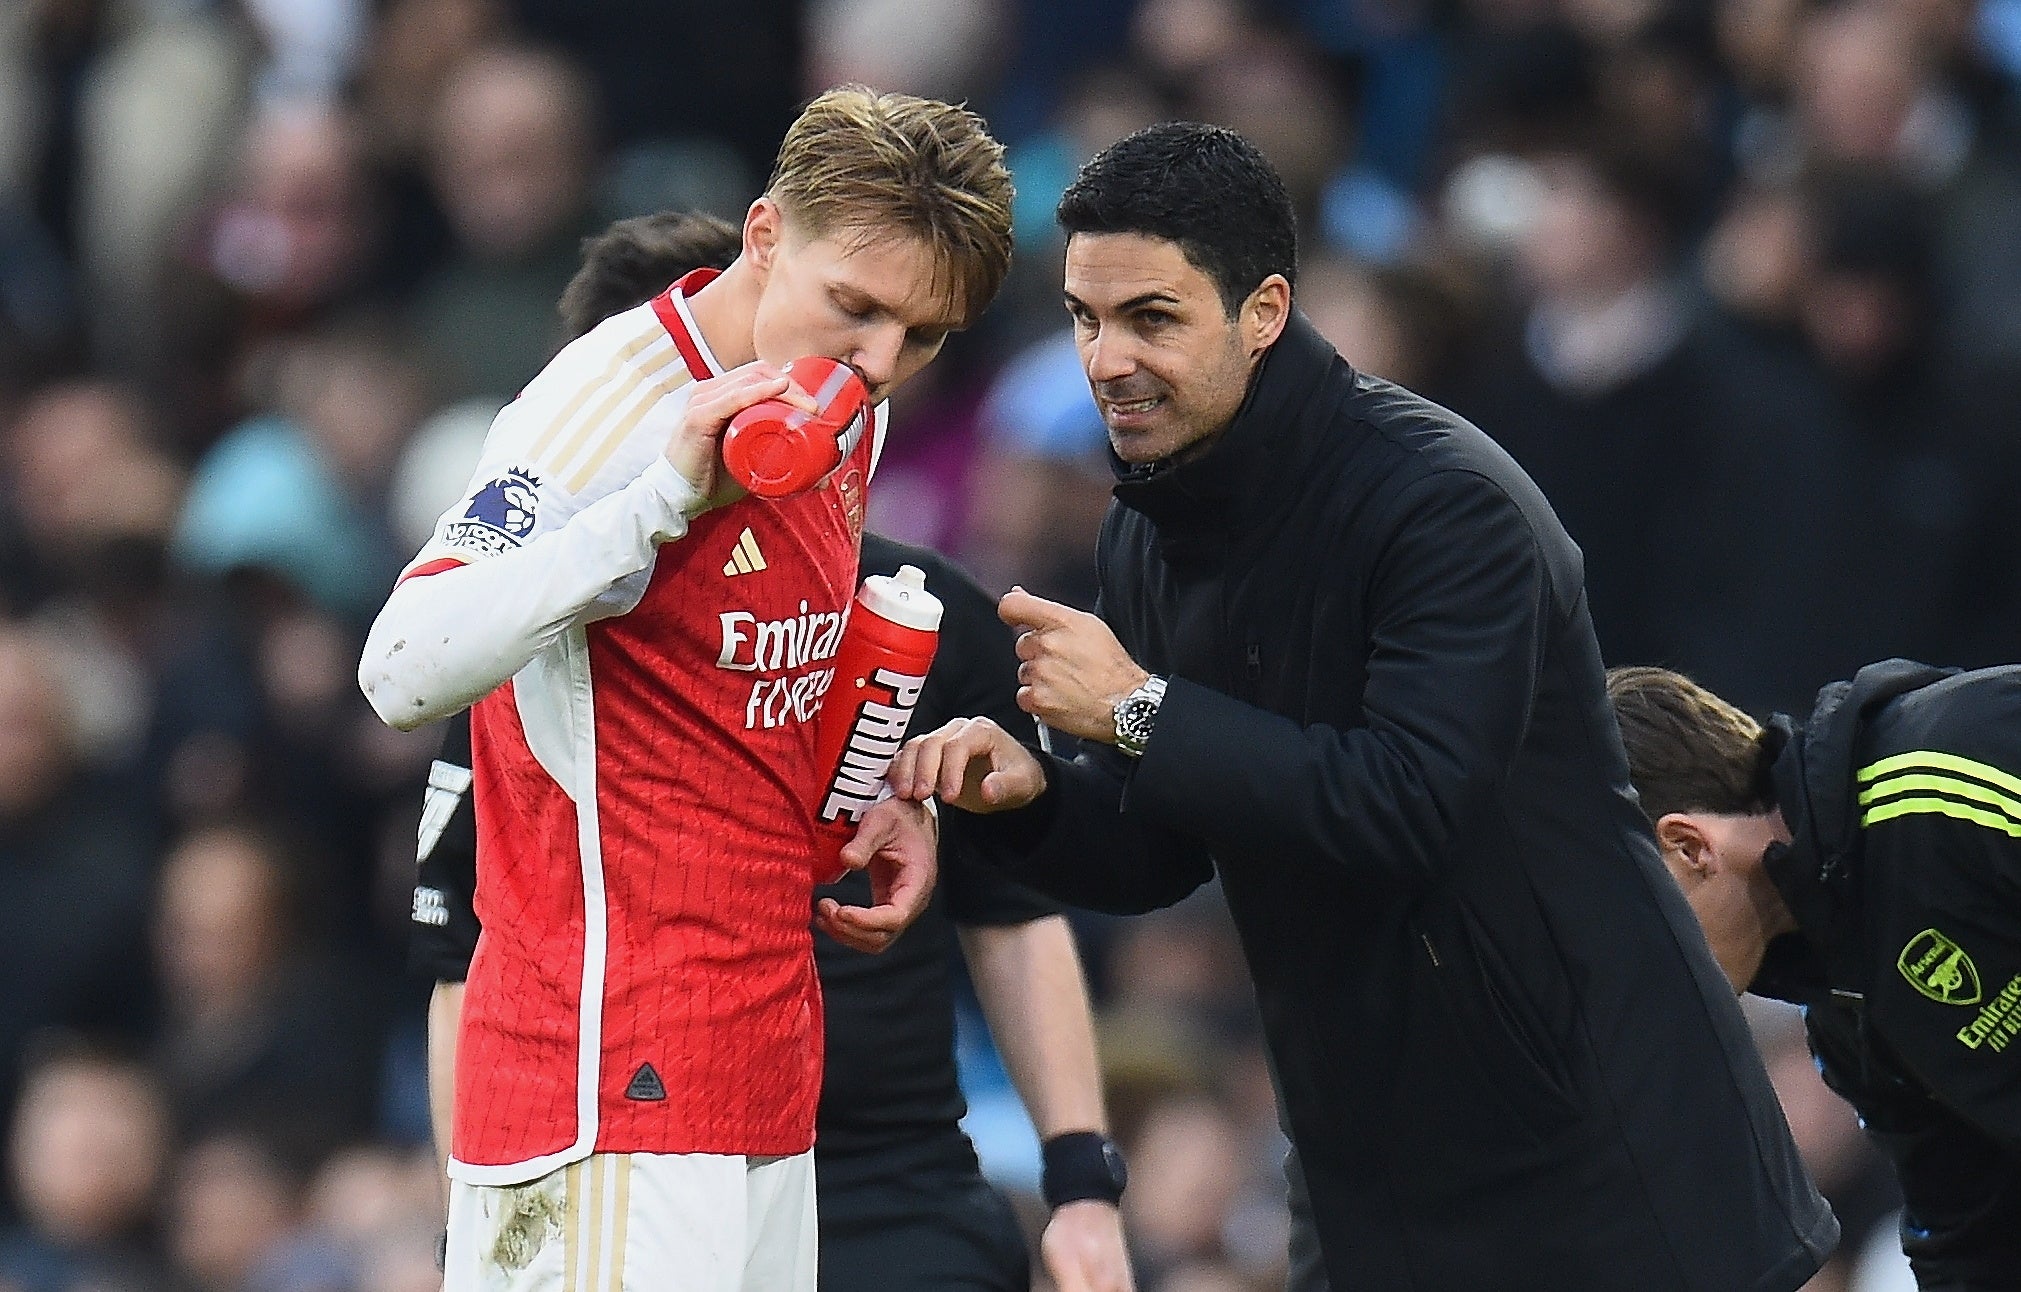 Can Martin Odegaard and Mikel Arteta orchestrate a successful gameplan against Bayern?